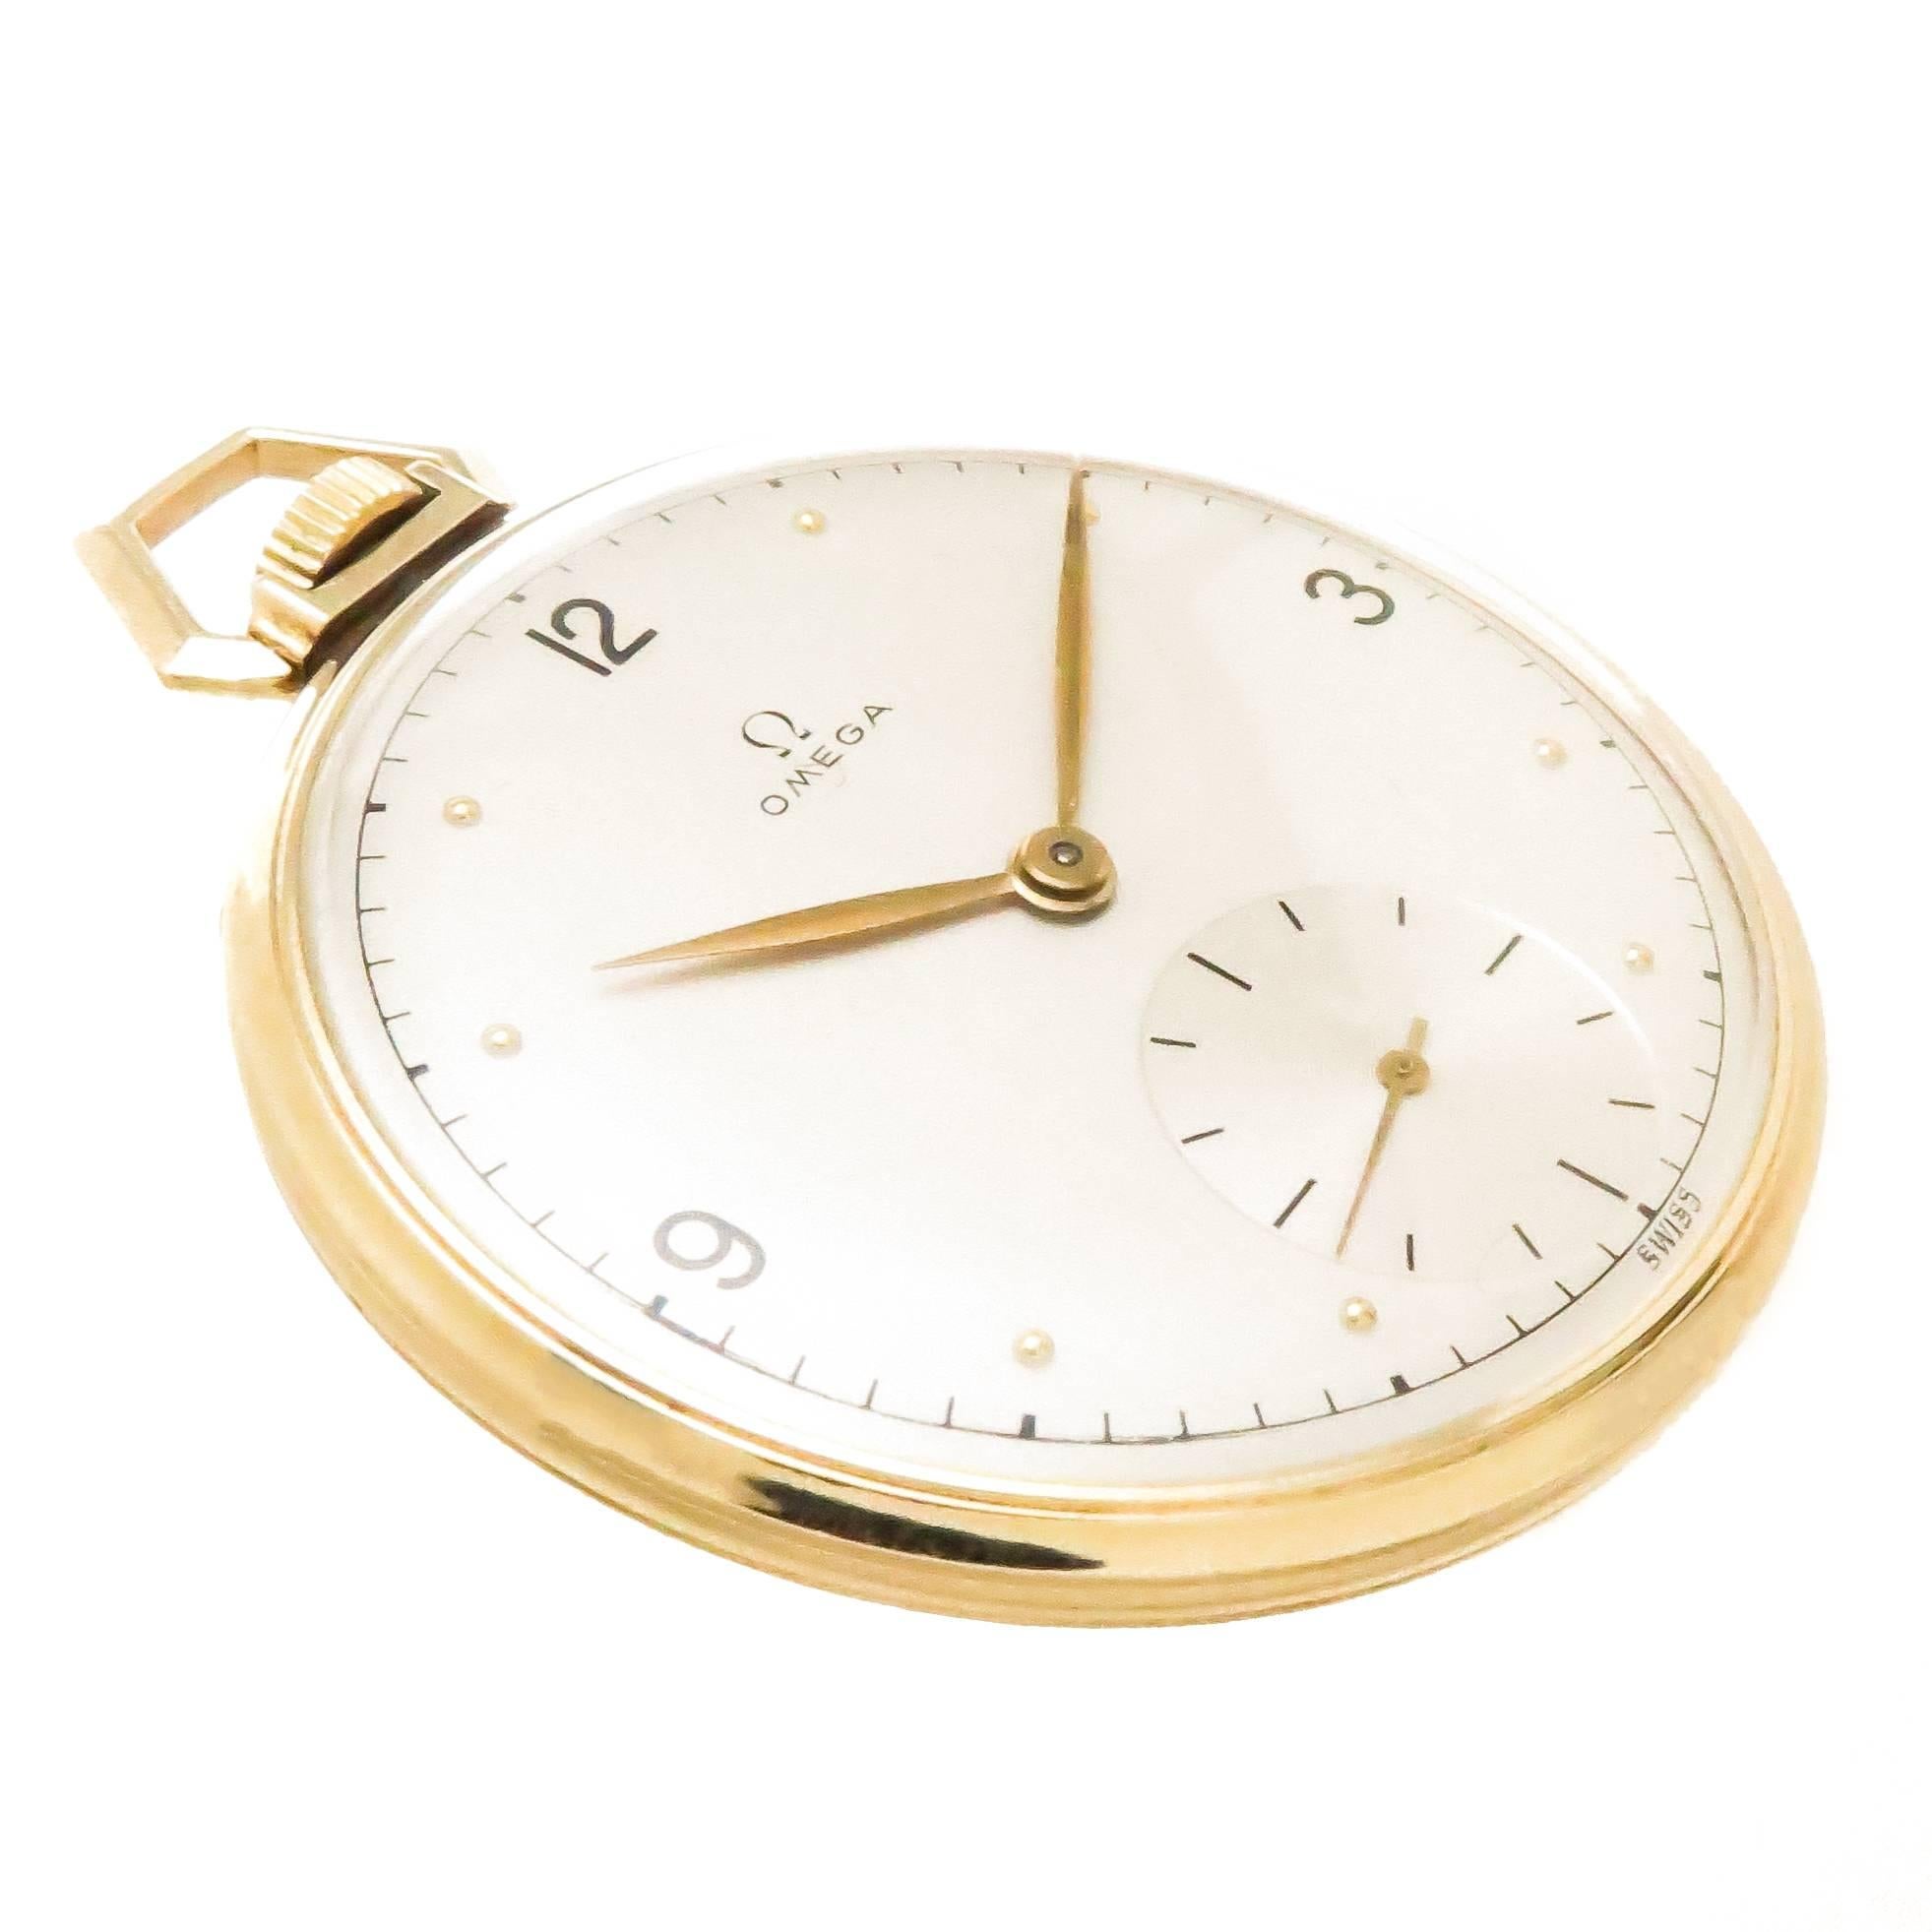 Circa 1950s Omega Pocket watch, 44 MM Yellow Gold Filled signed Omega Case, mechanical, manual wind 17 Jewel Movement. Silvered Dial with Raised Gold markers and a sub seconds chapter. Excellent, near mint condition overall. 